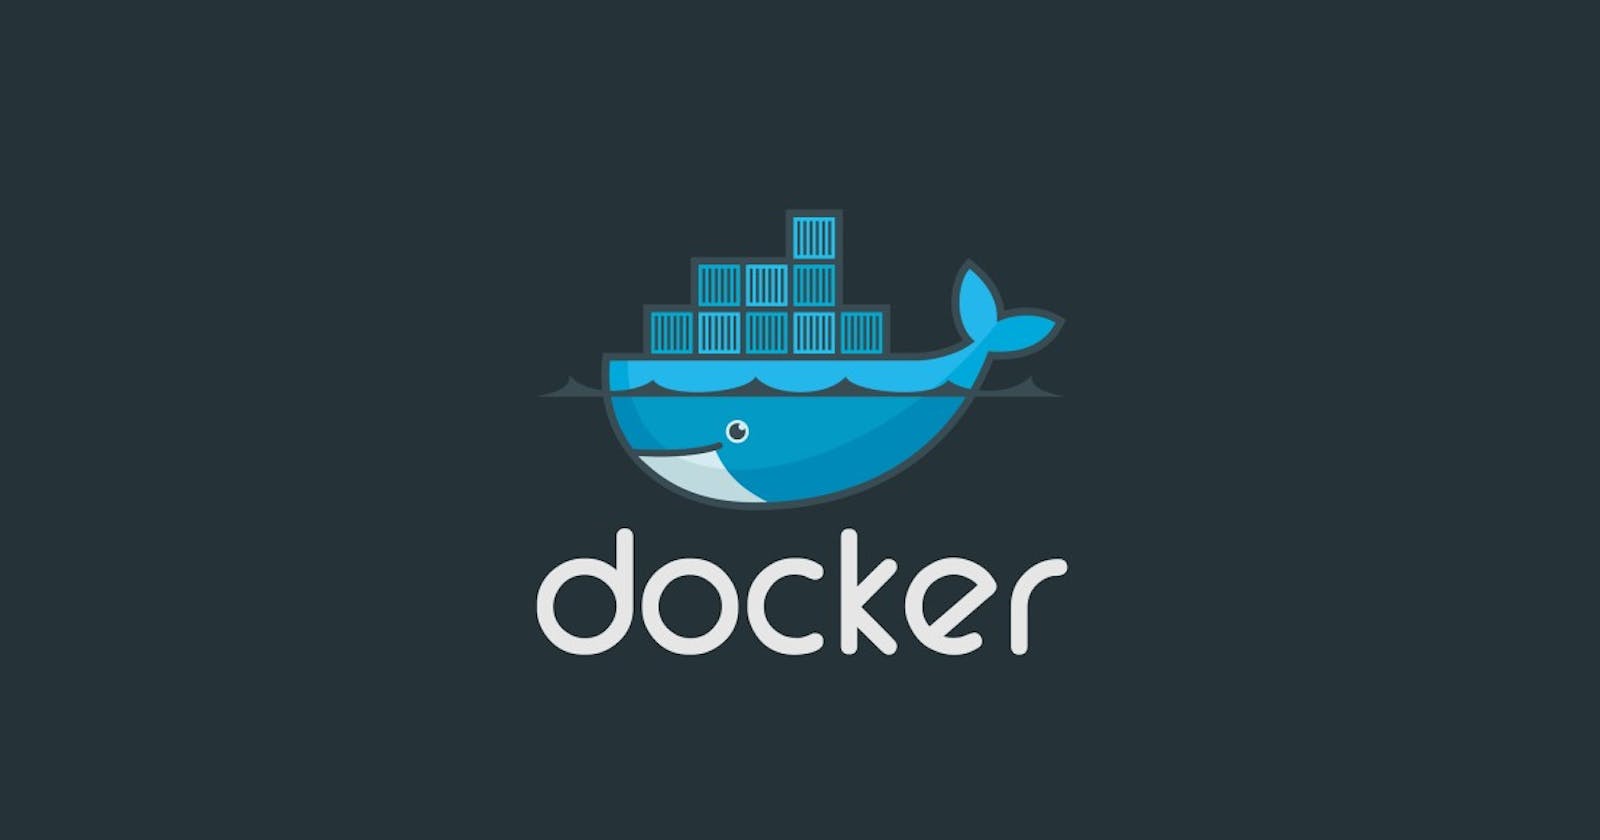 Setup and configure the apache webserver in the docker